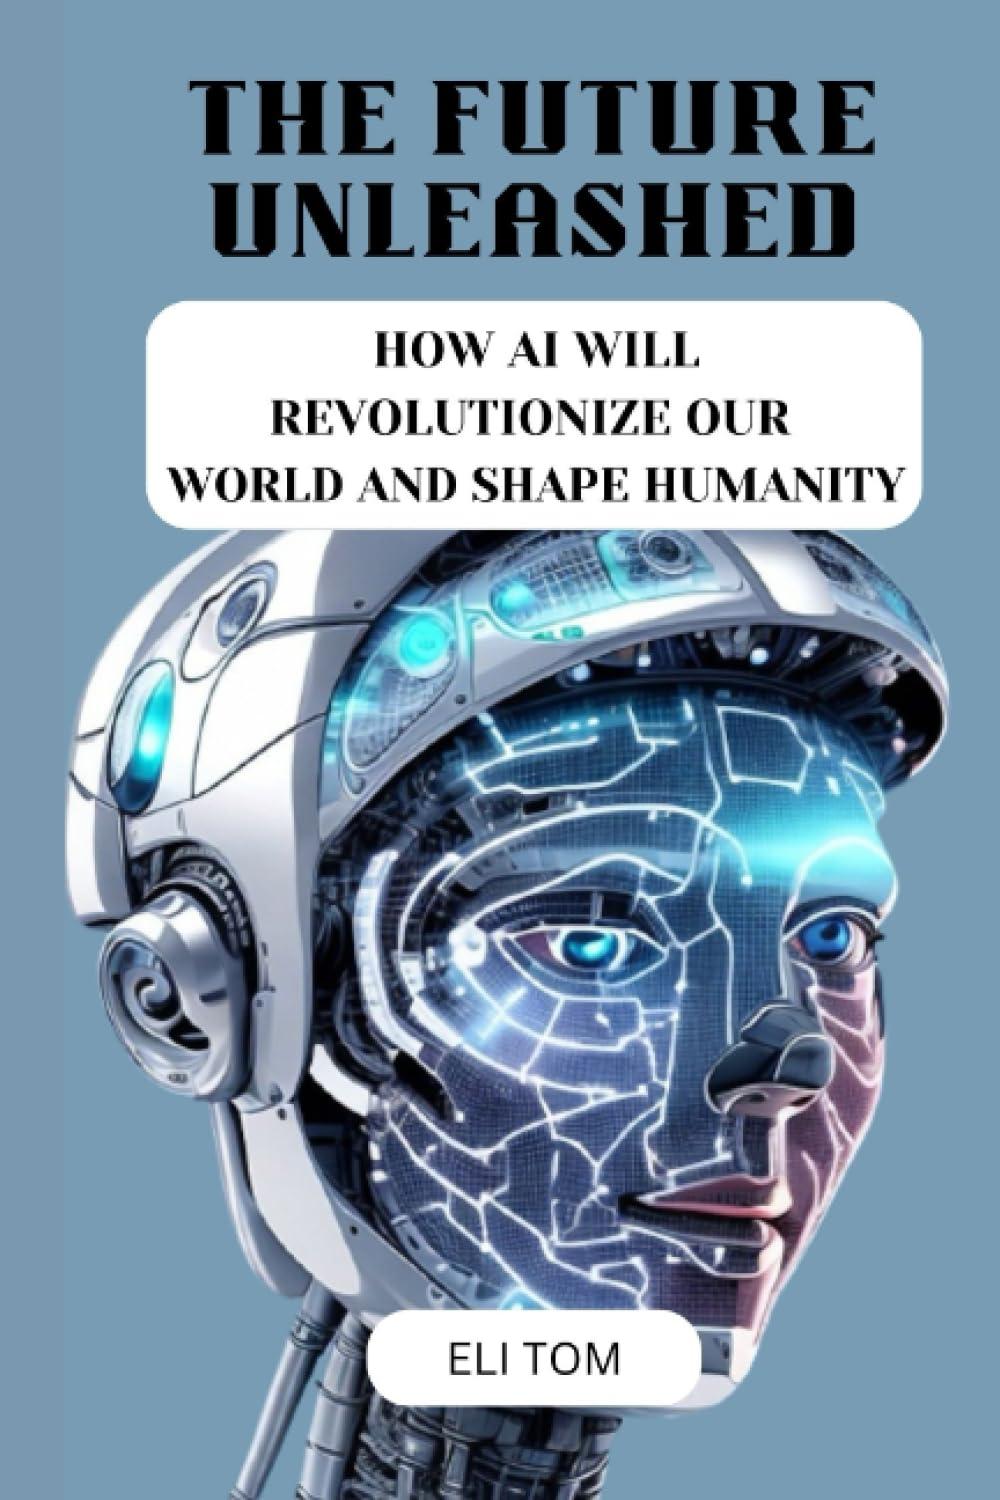 the future unleashed how ai will revolutionize our world and shape humanity 1st edition eli tom b0c7jd3gw6,